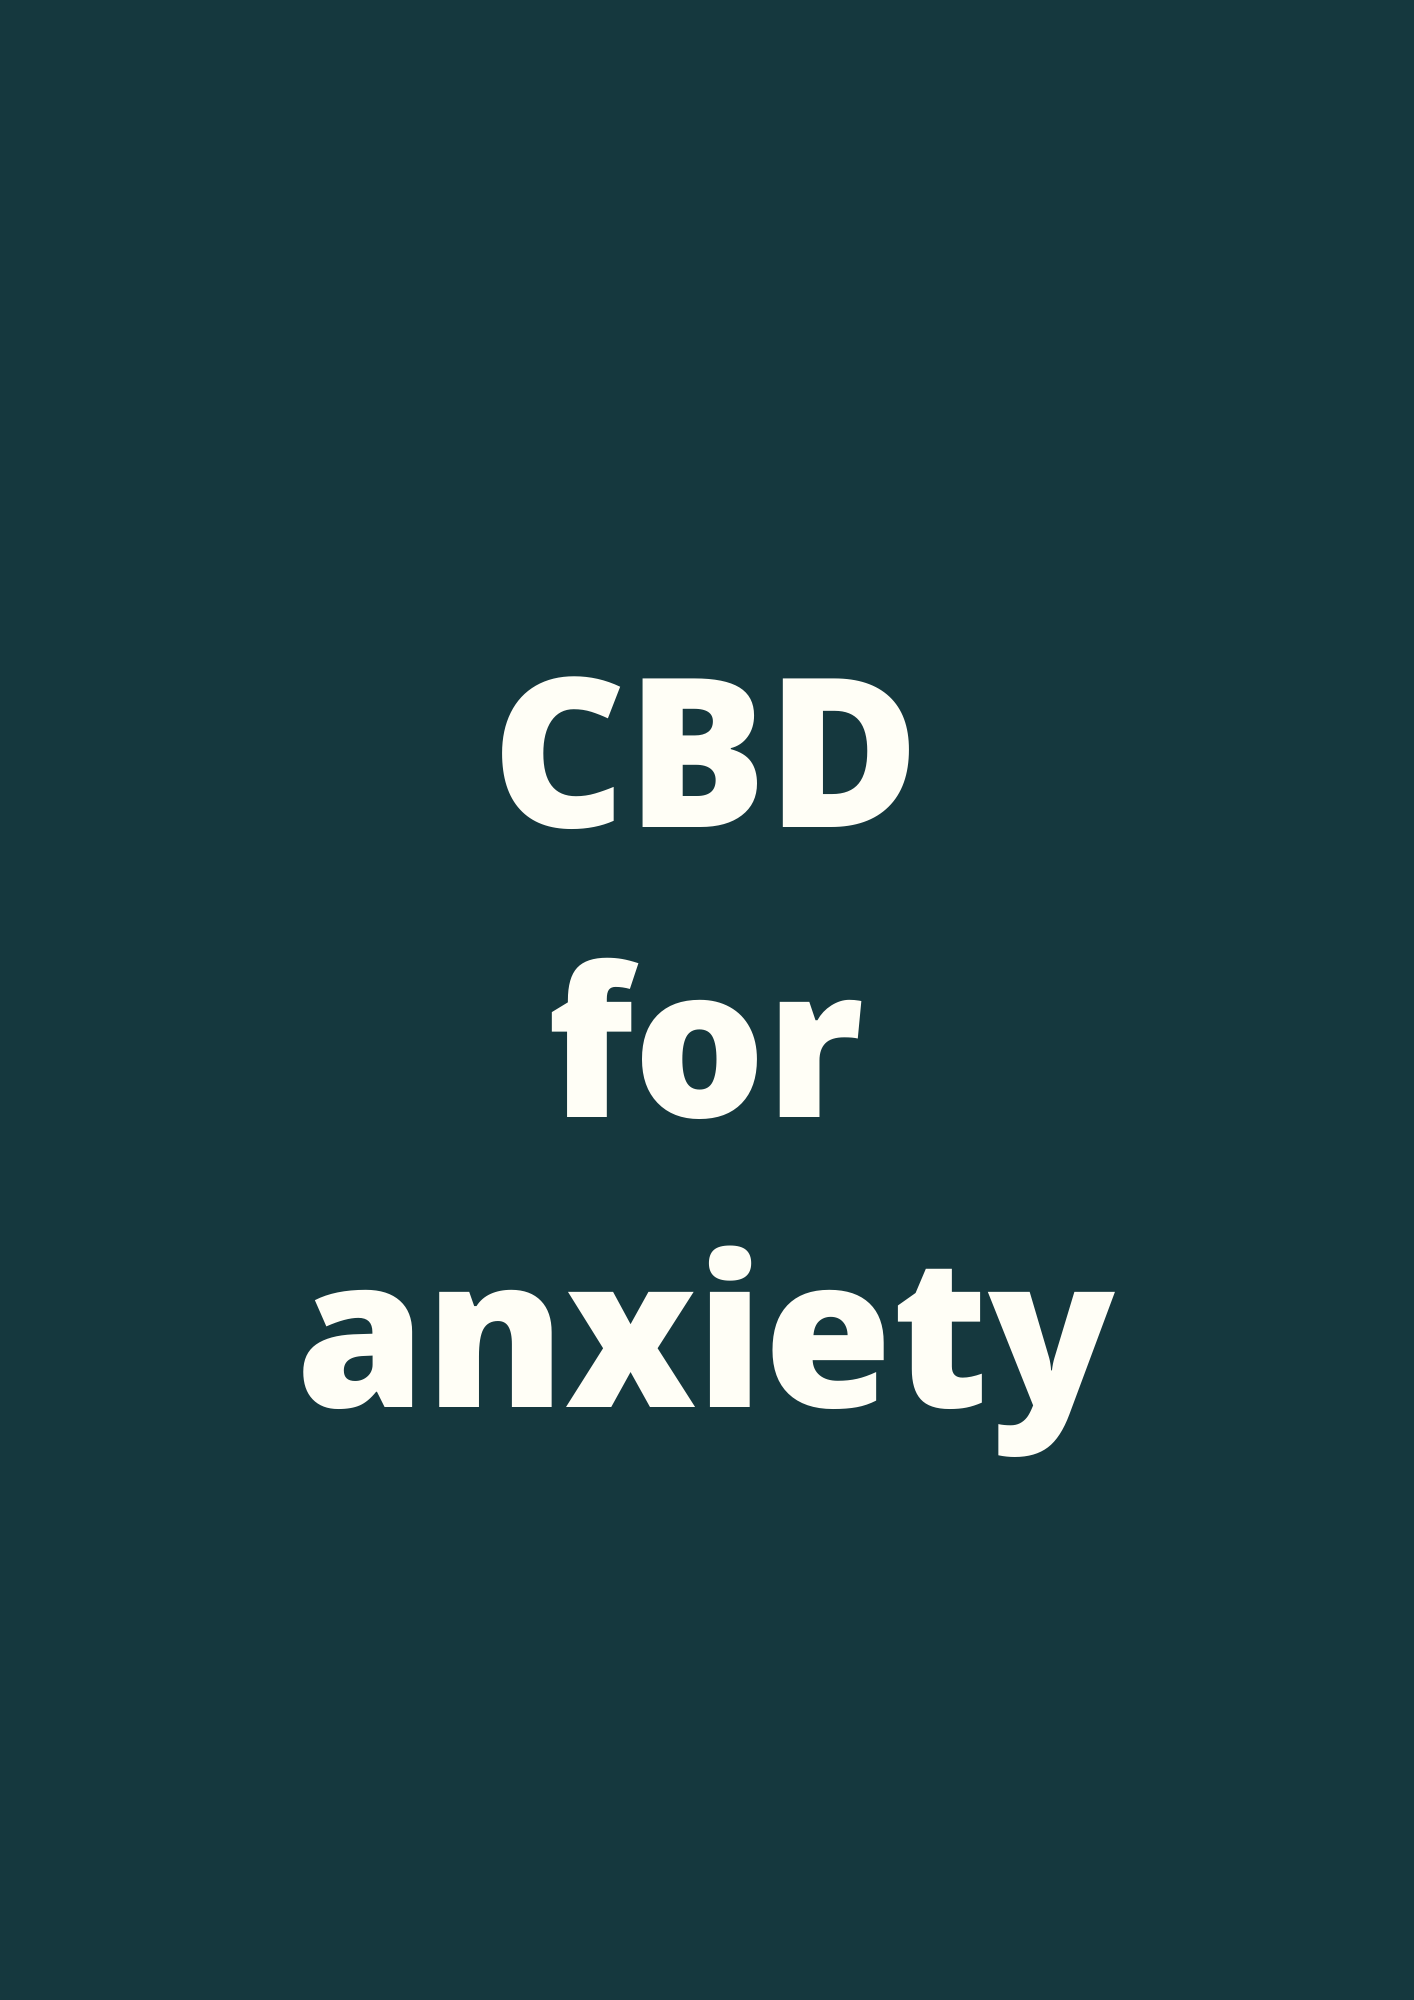 Scientific paper on CBD for anxiety